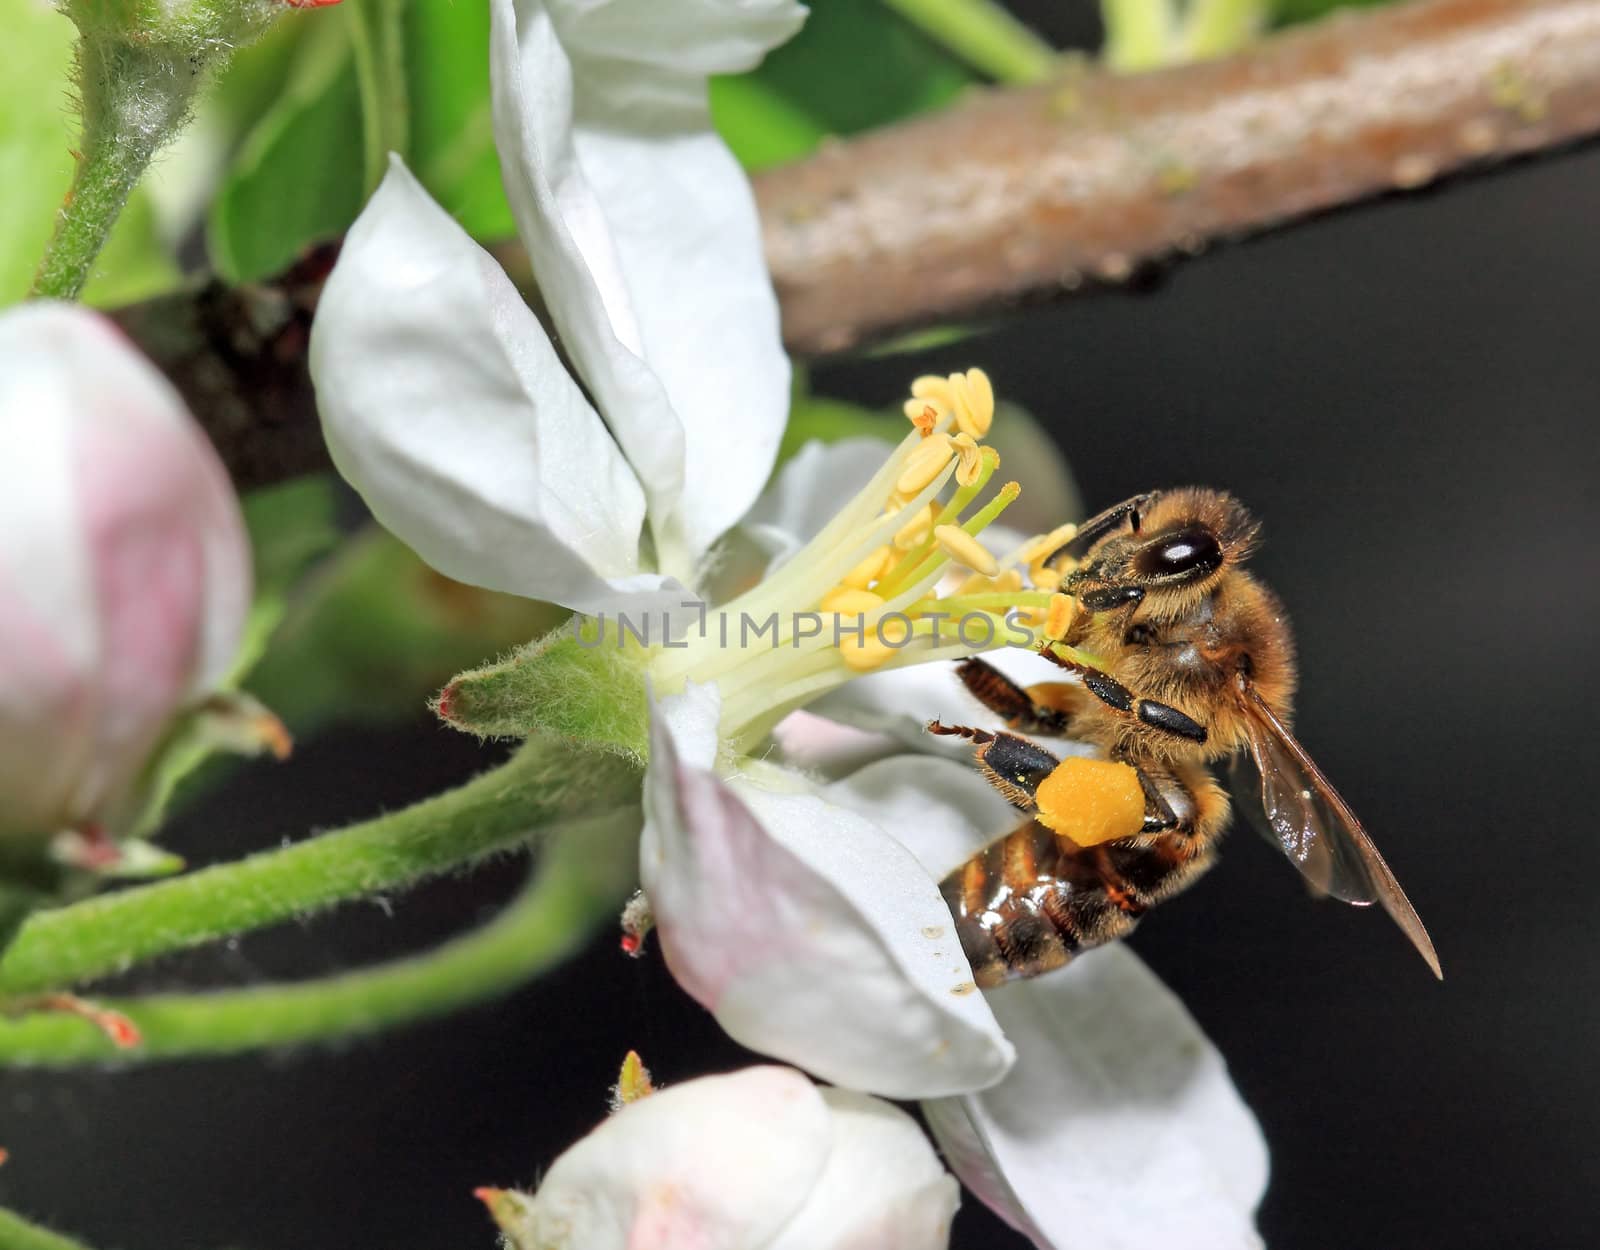 yellow wasp on aple tree flower